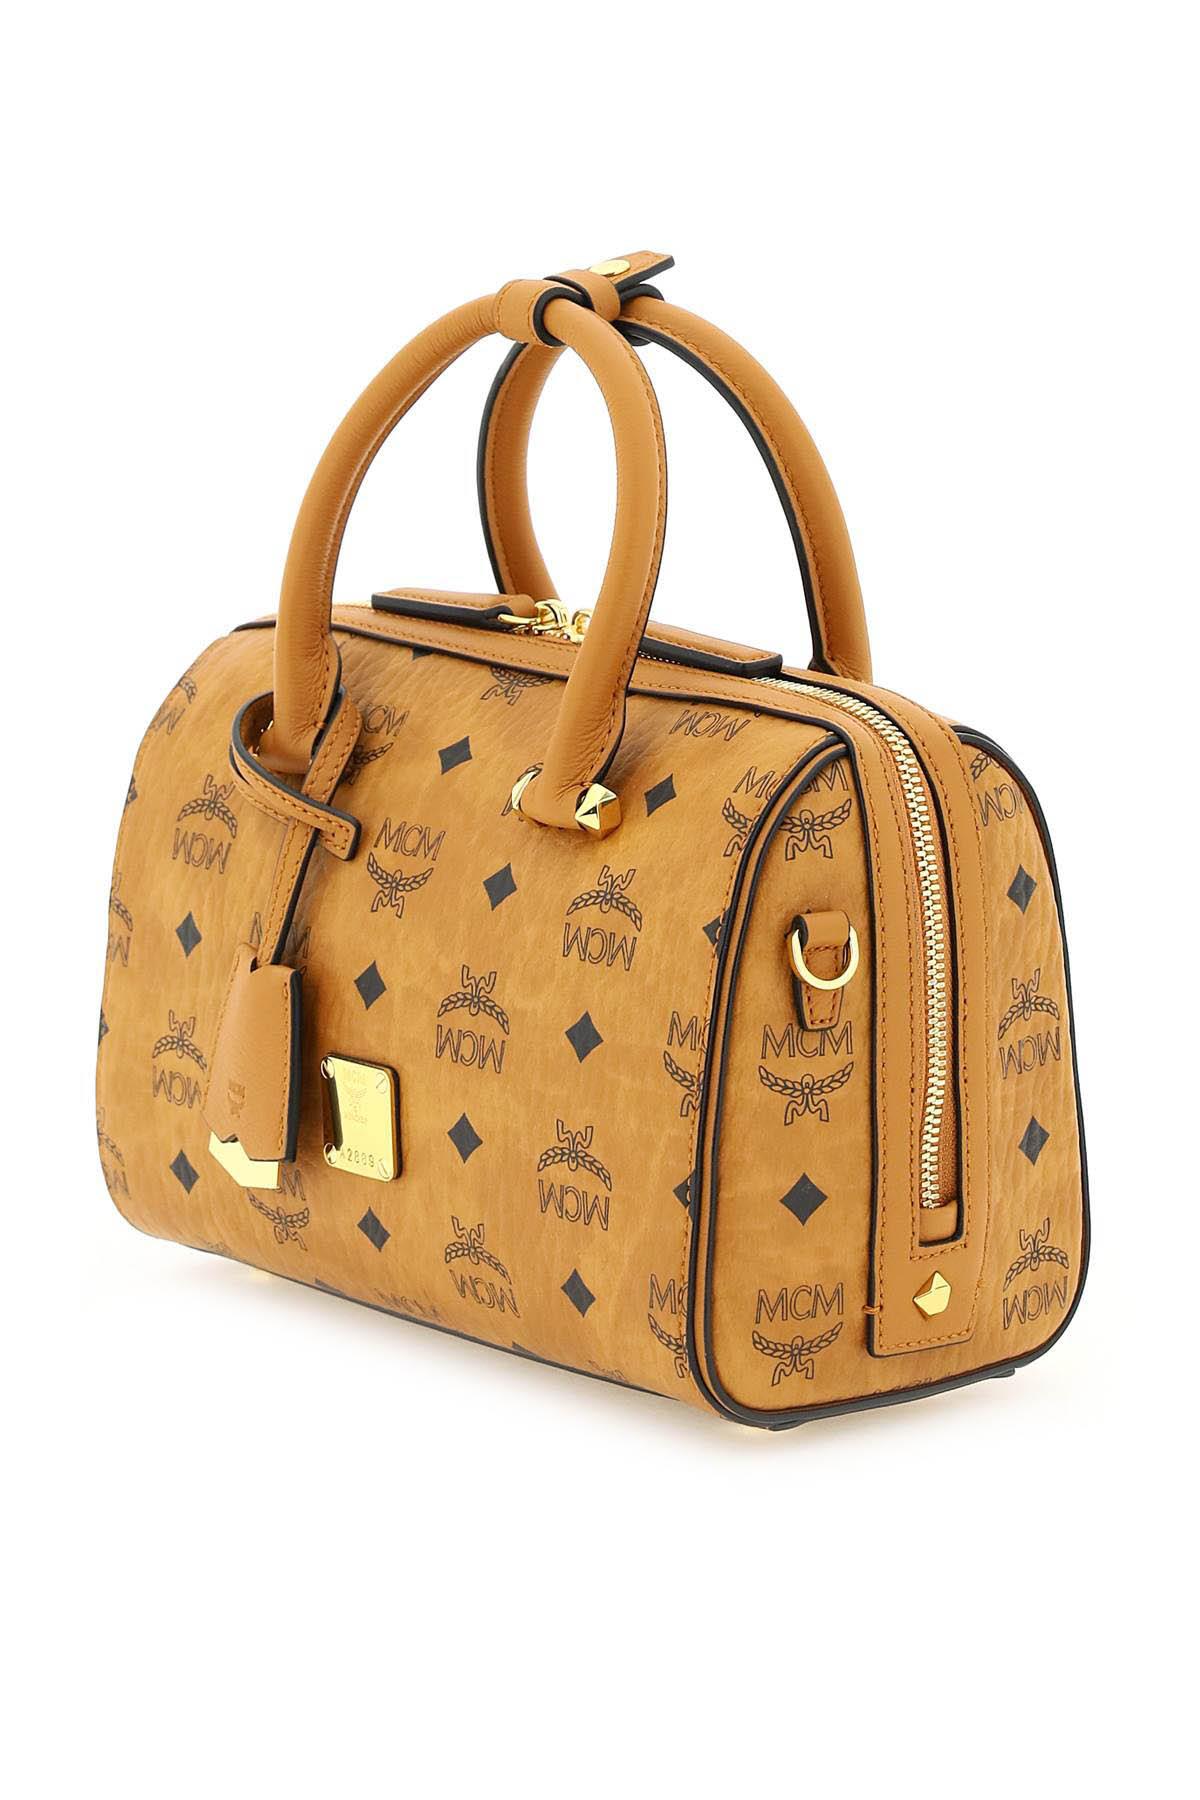 Mcm Logo Leather Shoulder Bag - Realry: Your Fashion Search Engine